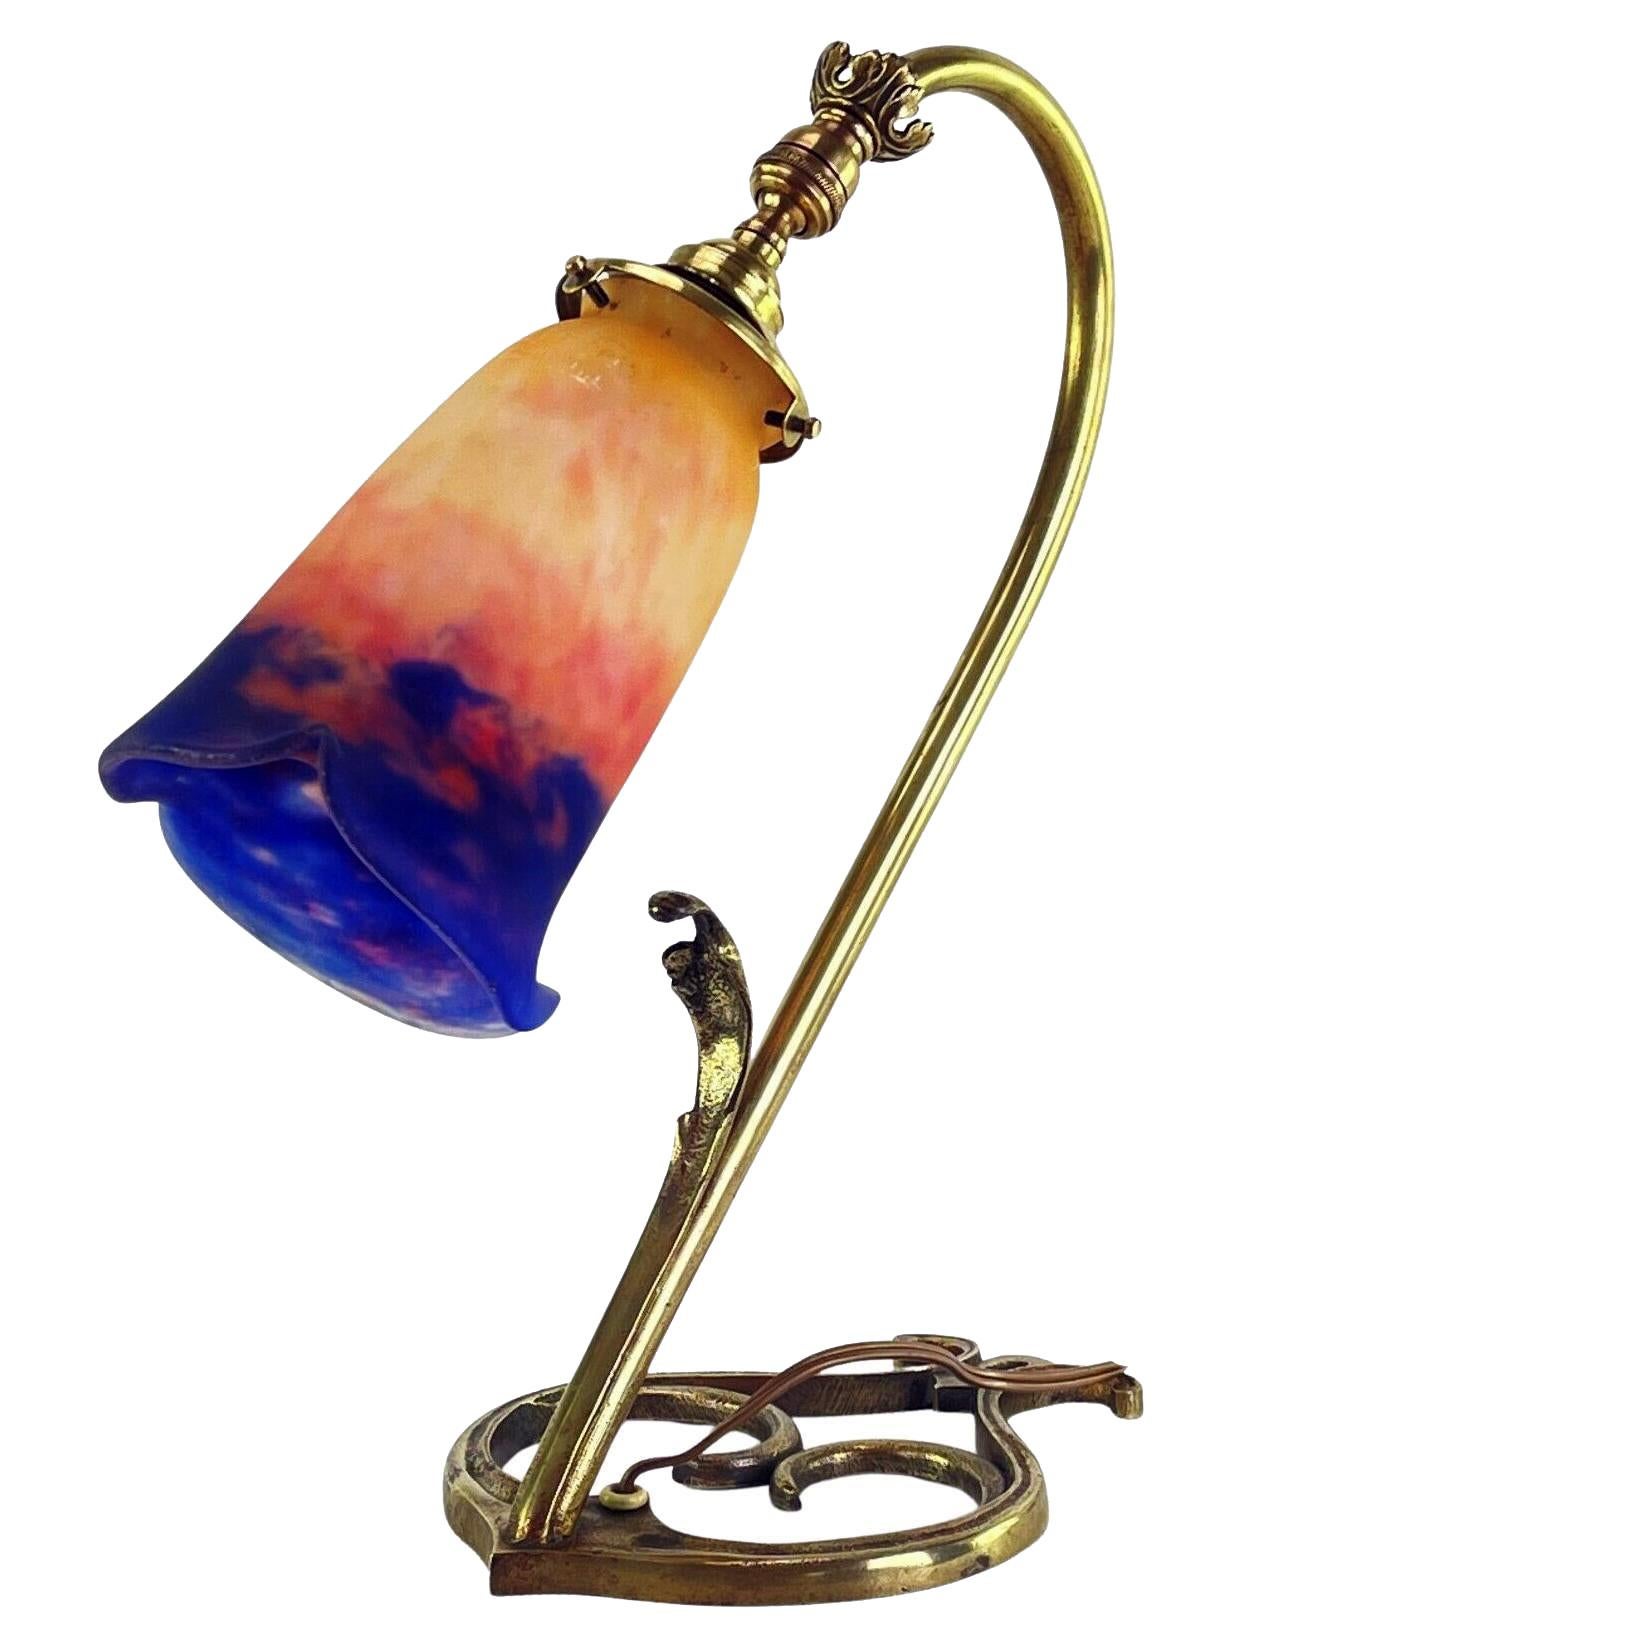 Art Nouveau bronze glass desk lamp, France C.1910 Muller Frères, Luneville. The lamp style of Louis Majorelle (French designer late 19th century renowned for organic use of curves) supporting an attractive pate-de-verre lampshade in orange, red and